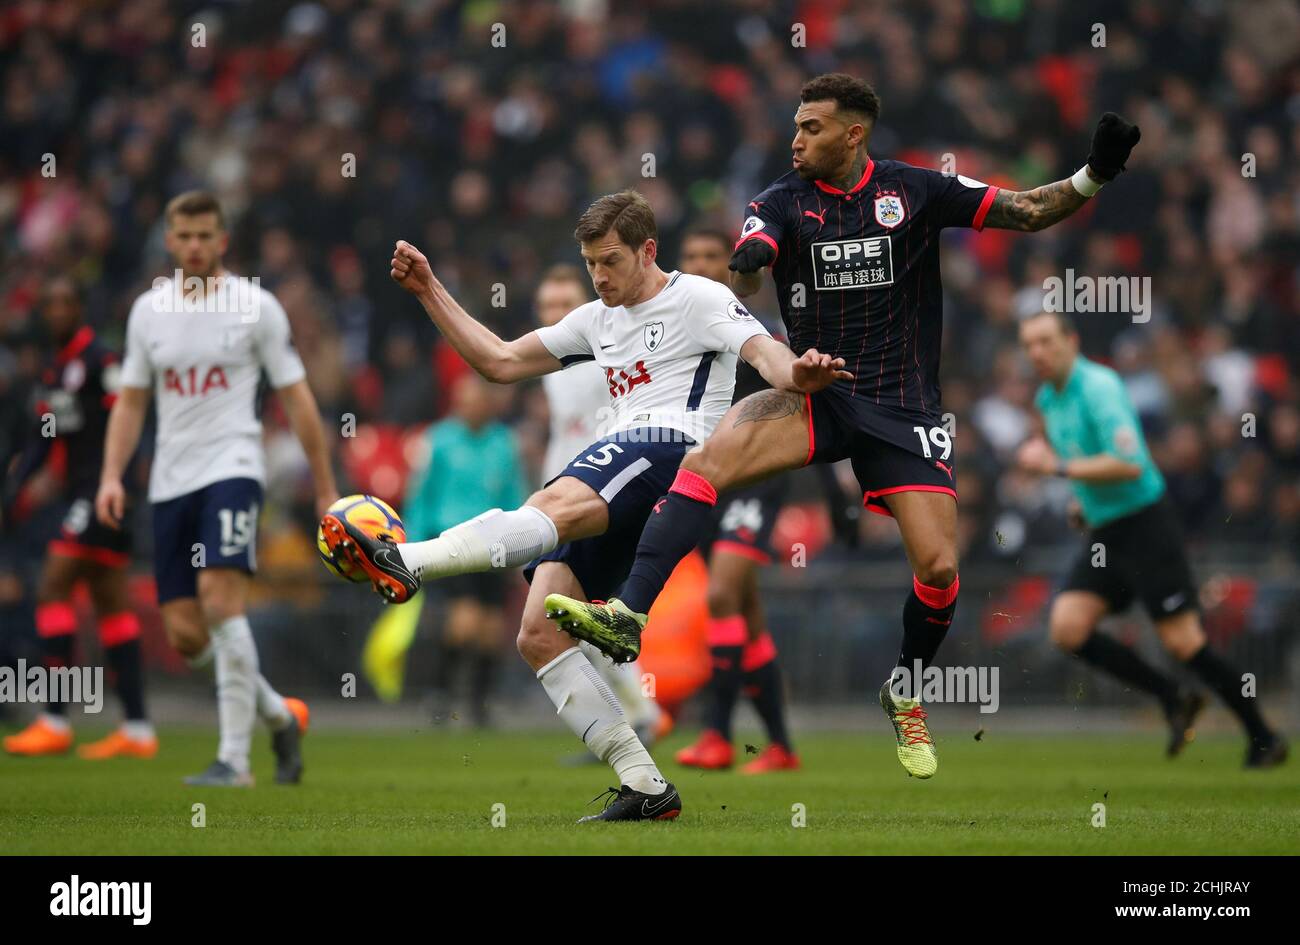 Soccer Football - Premier League - Tottenham Hotspur vs Huddersfield Town - Wembley Stadium, London, Britain - March 3, 2018   Huddersfield Town’s Danny Williams in action with Tottenham's Jan Vertonghen    REUTERS/Eddie Keogh    EDITORIAL USE ONLY. No use with unauthorized audio, video, data, fixture lists, club/league logos or 'live' services. Online in-match use limited to 75 images, no video emulation. No use in betting, games or single club/league/player publications.  Please contact your account representative for further details. Stock Photo